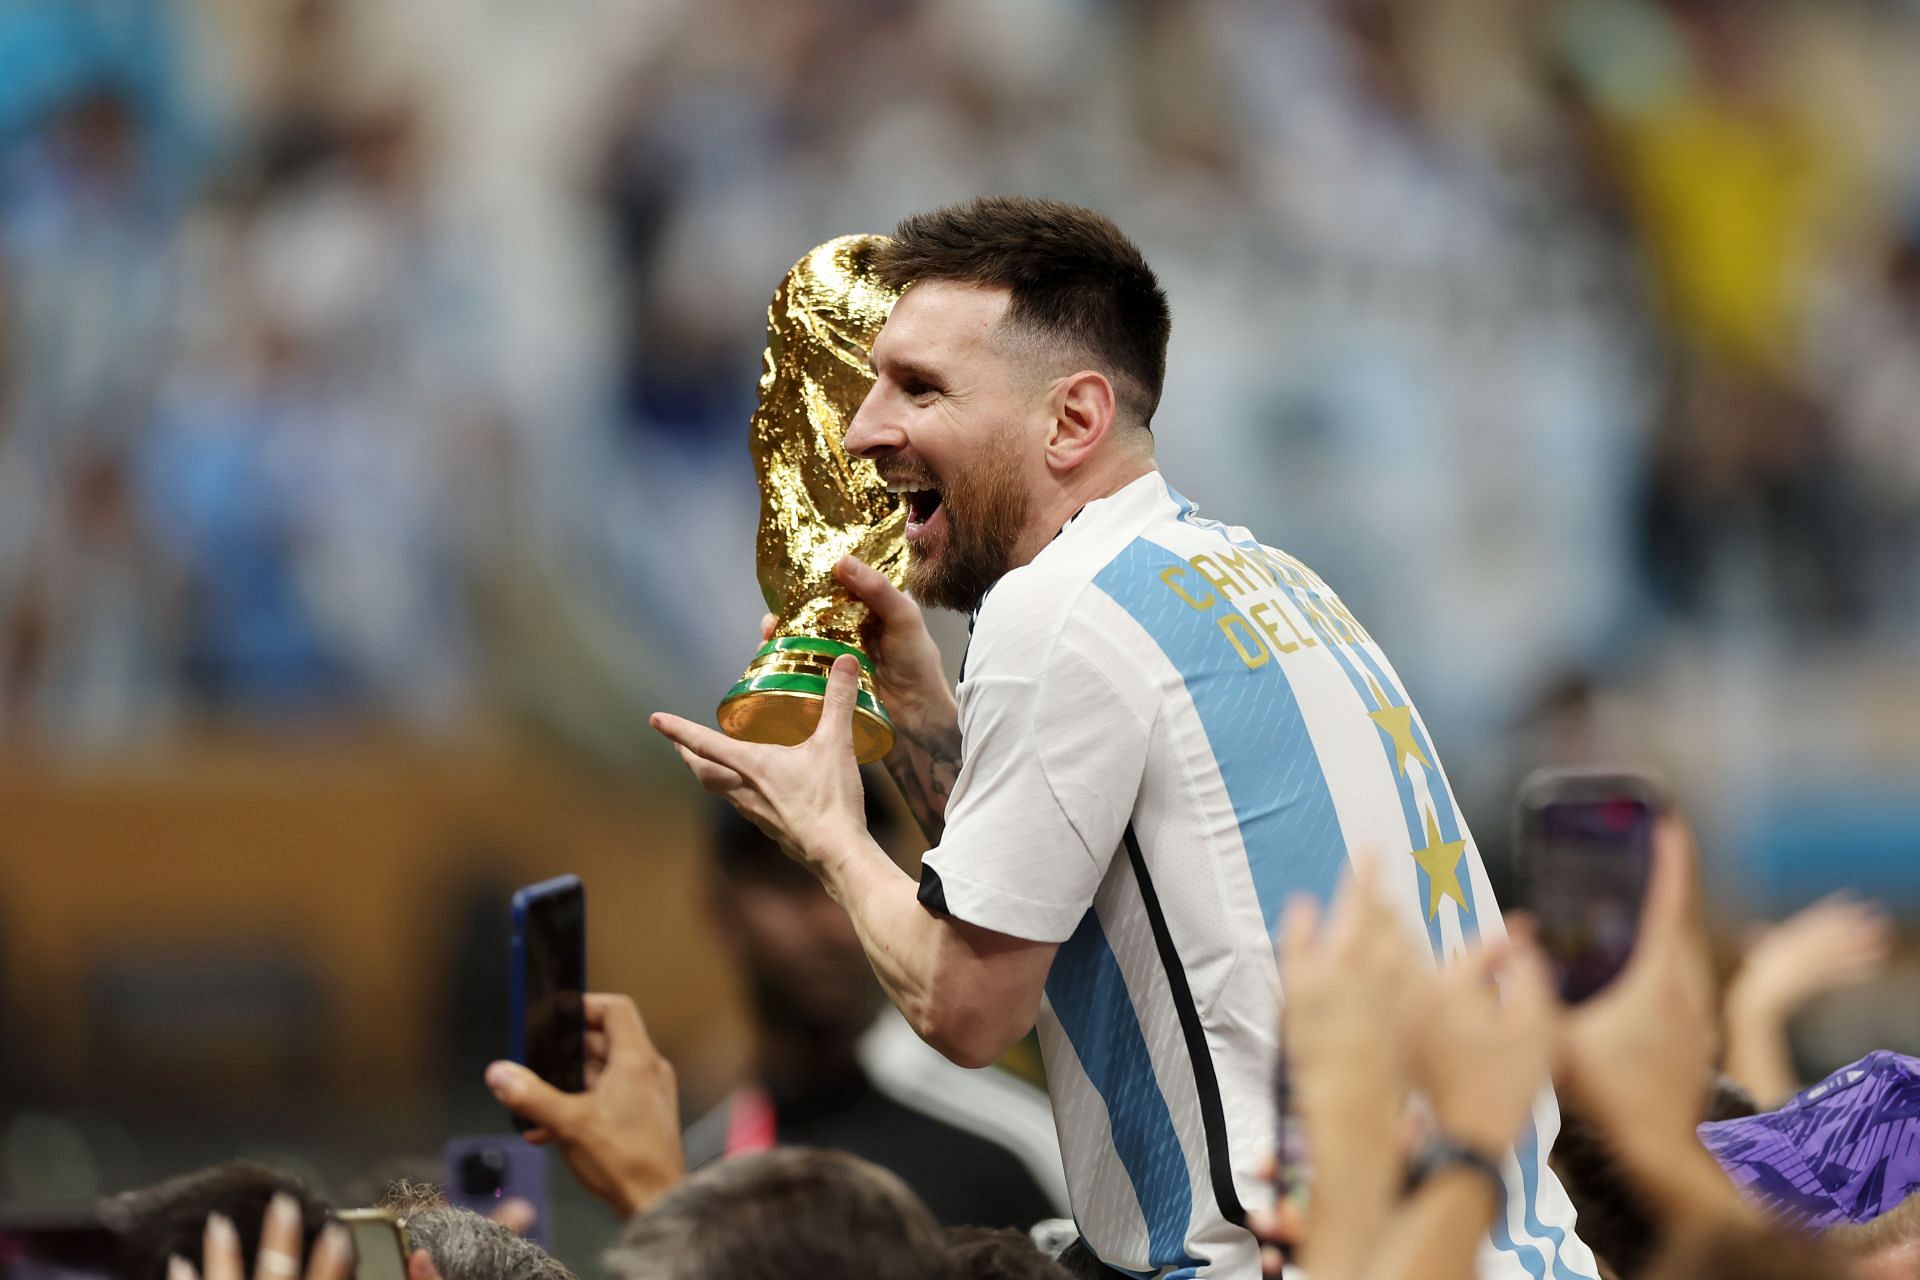 Lionel Messi finally got his hands on the World Cup.